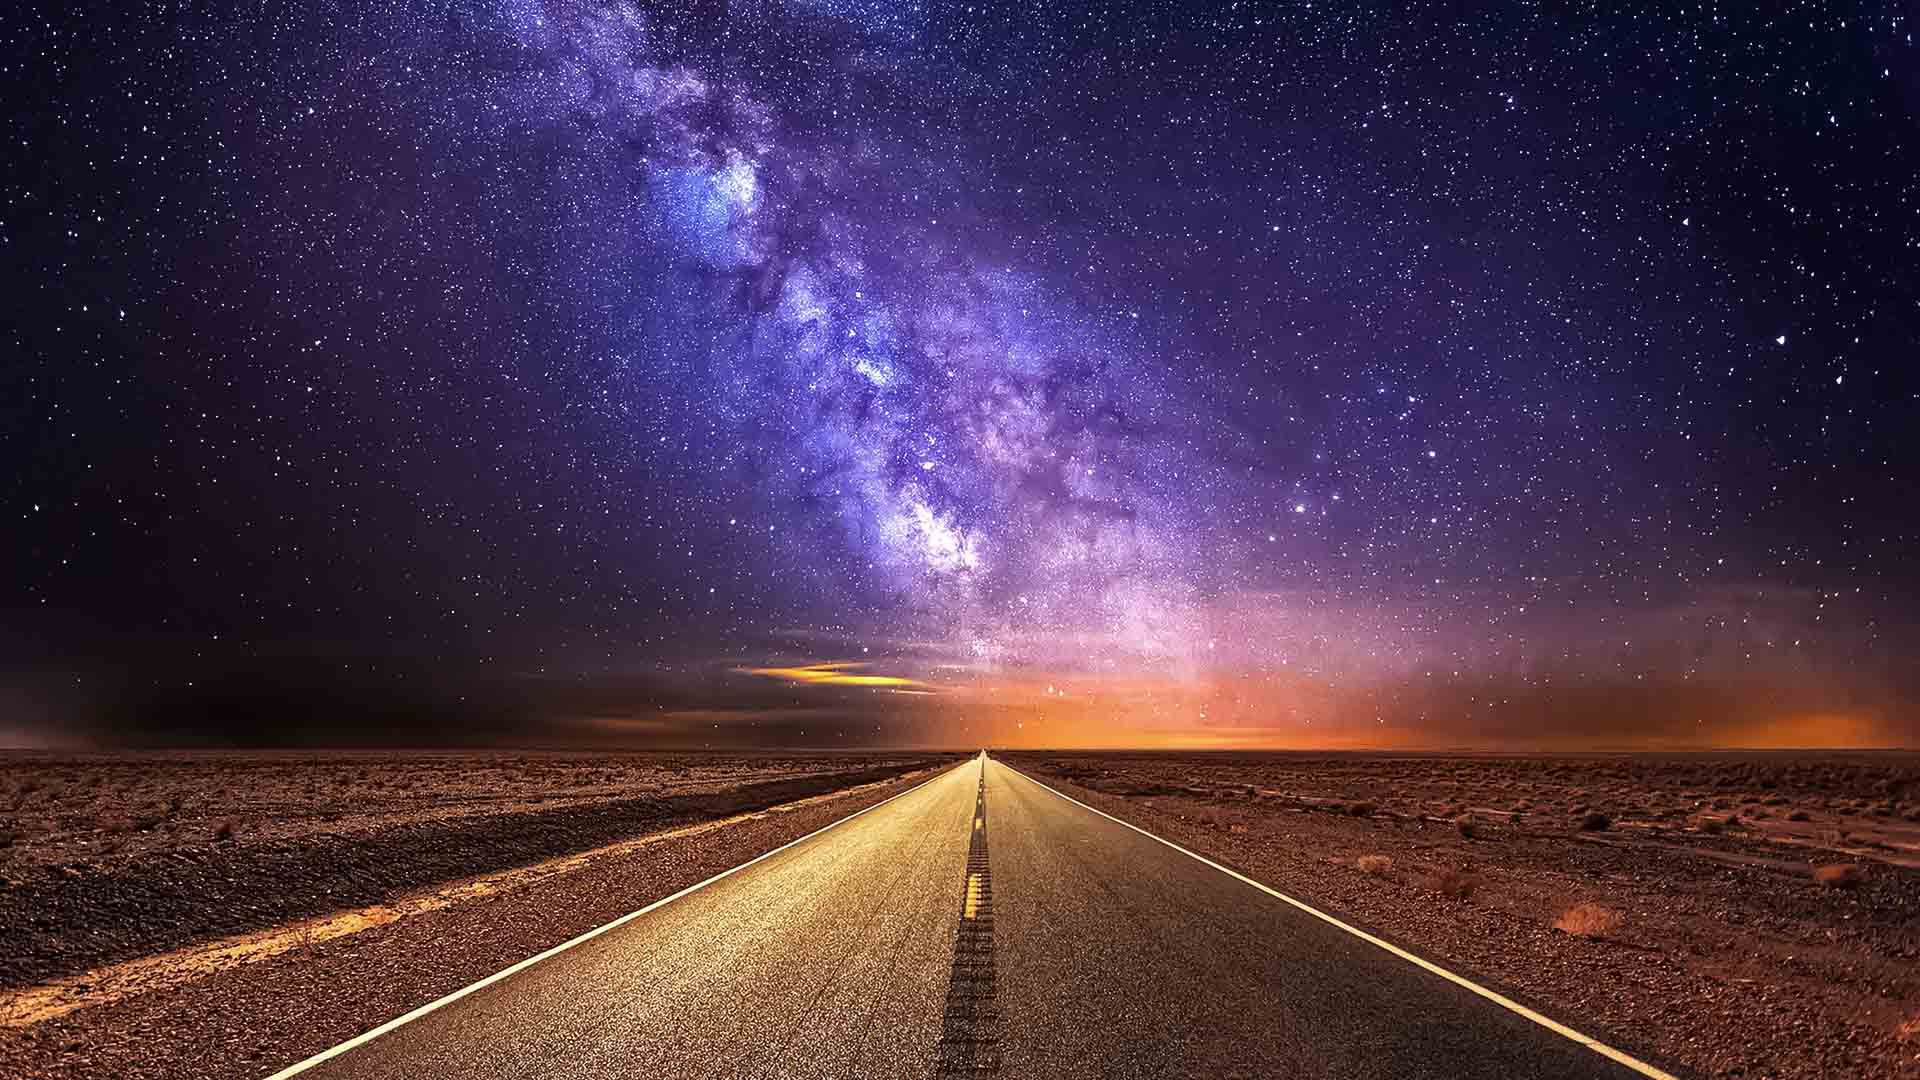 Road in the desert and the purple milky way